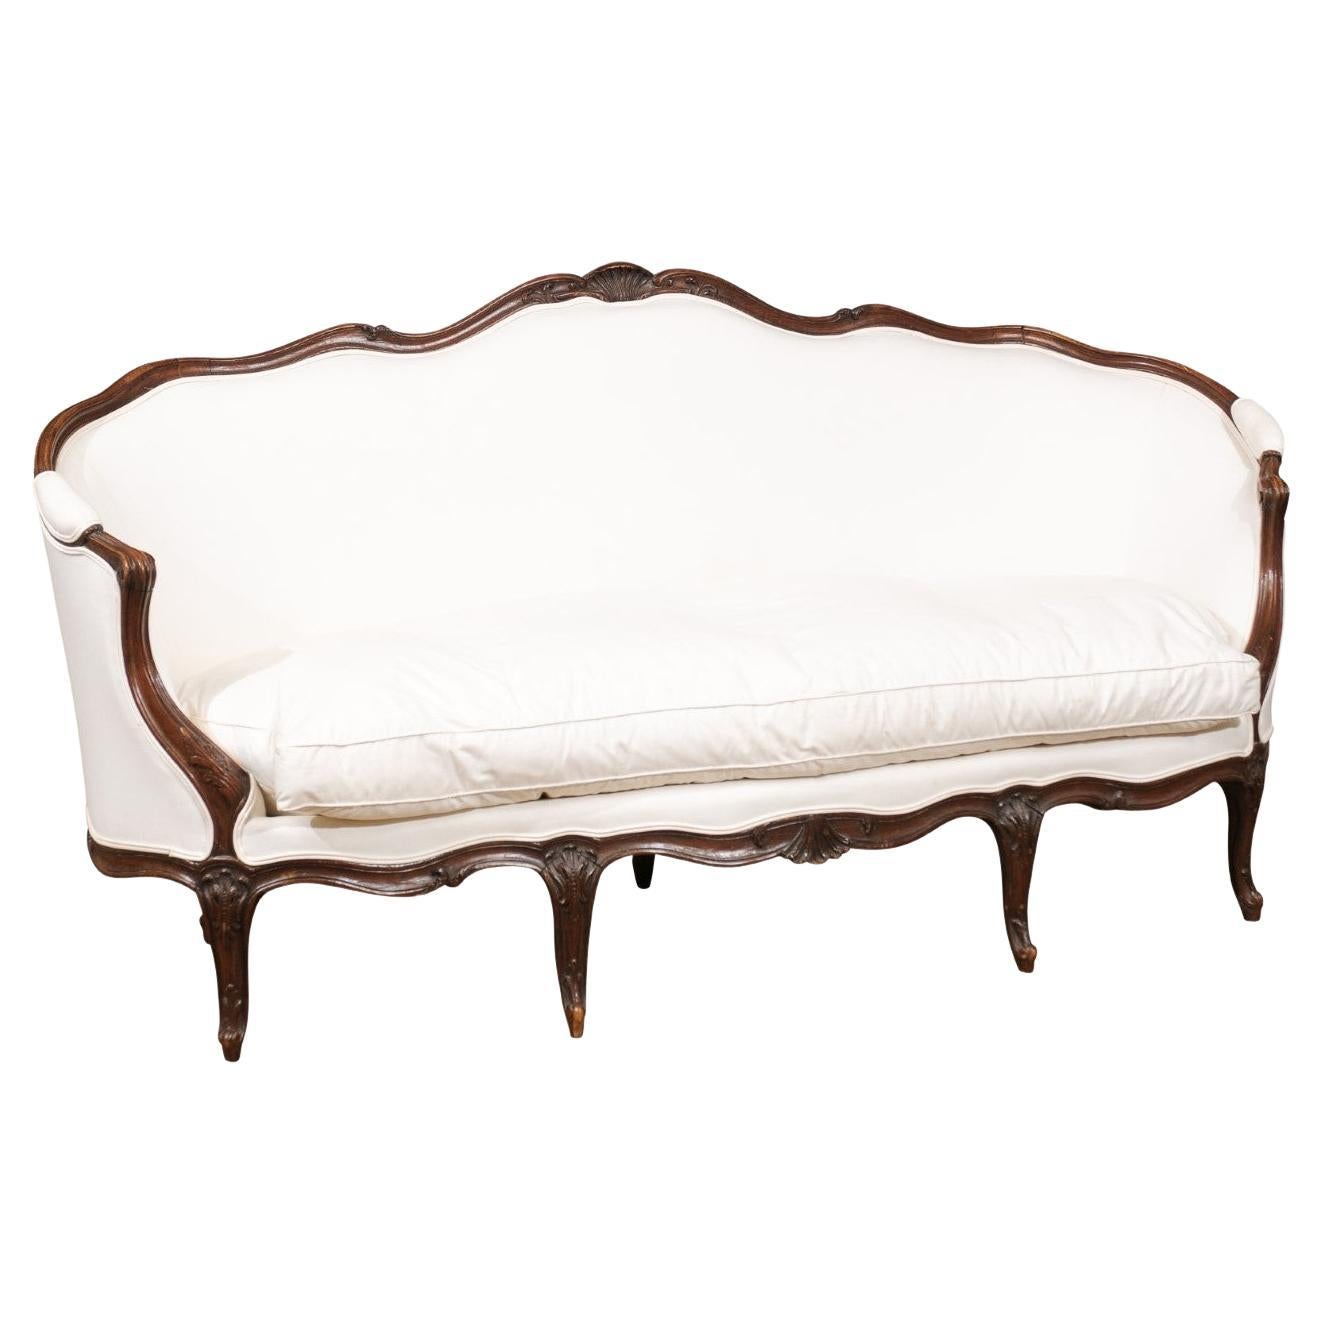 French Louis XV Style Walnut Upholstered Canapé with Wraparound Back, circa 1850